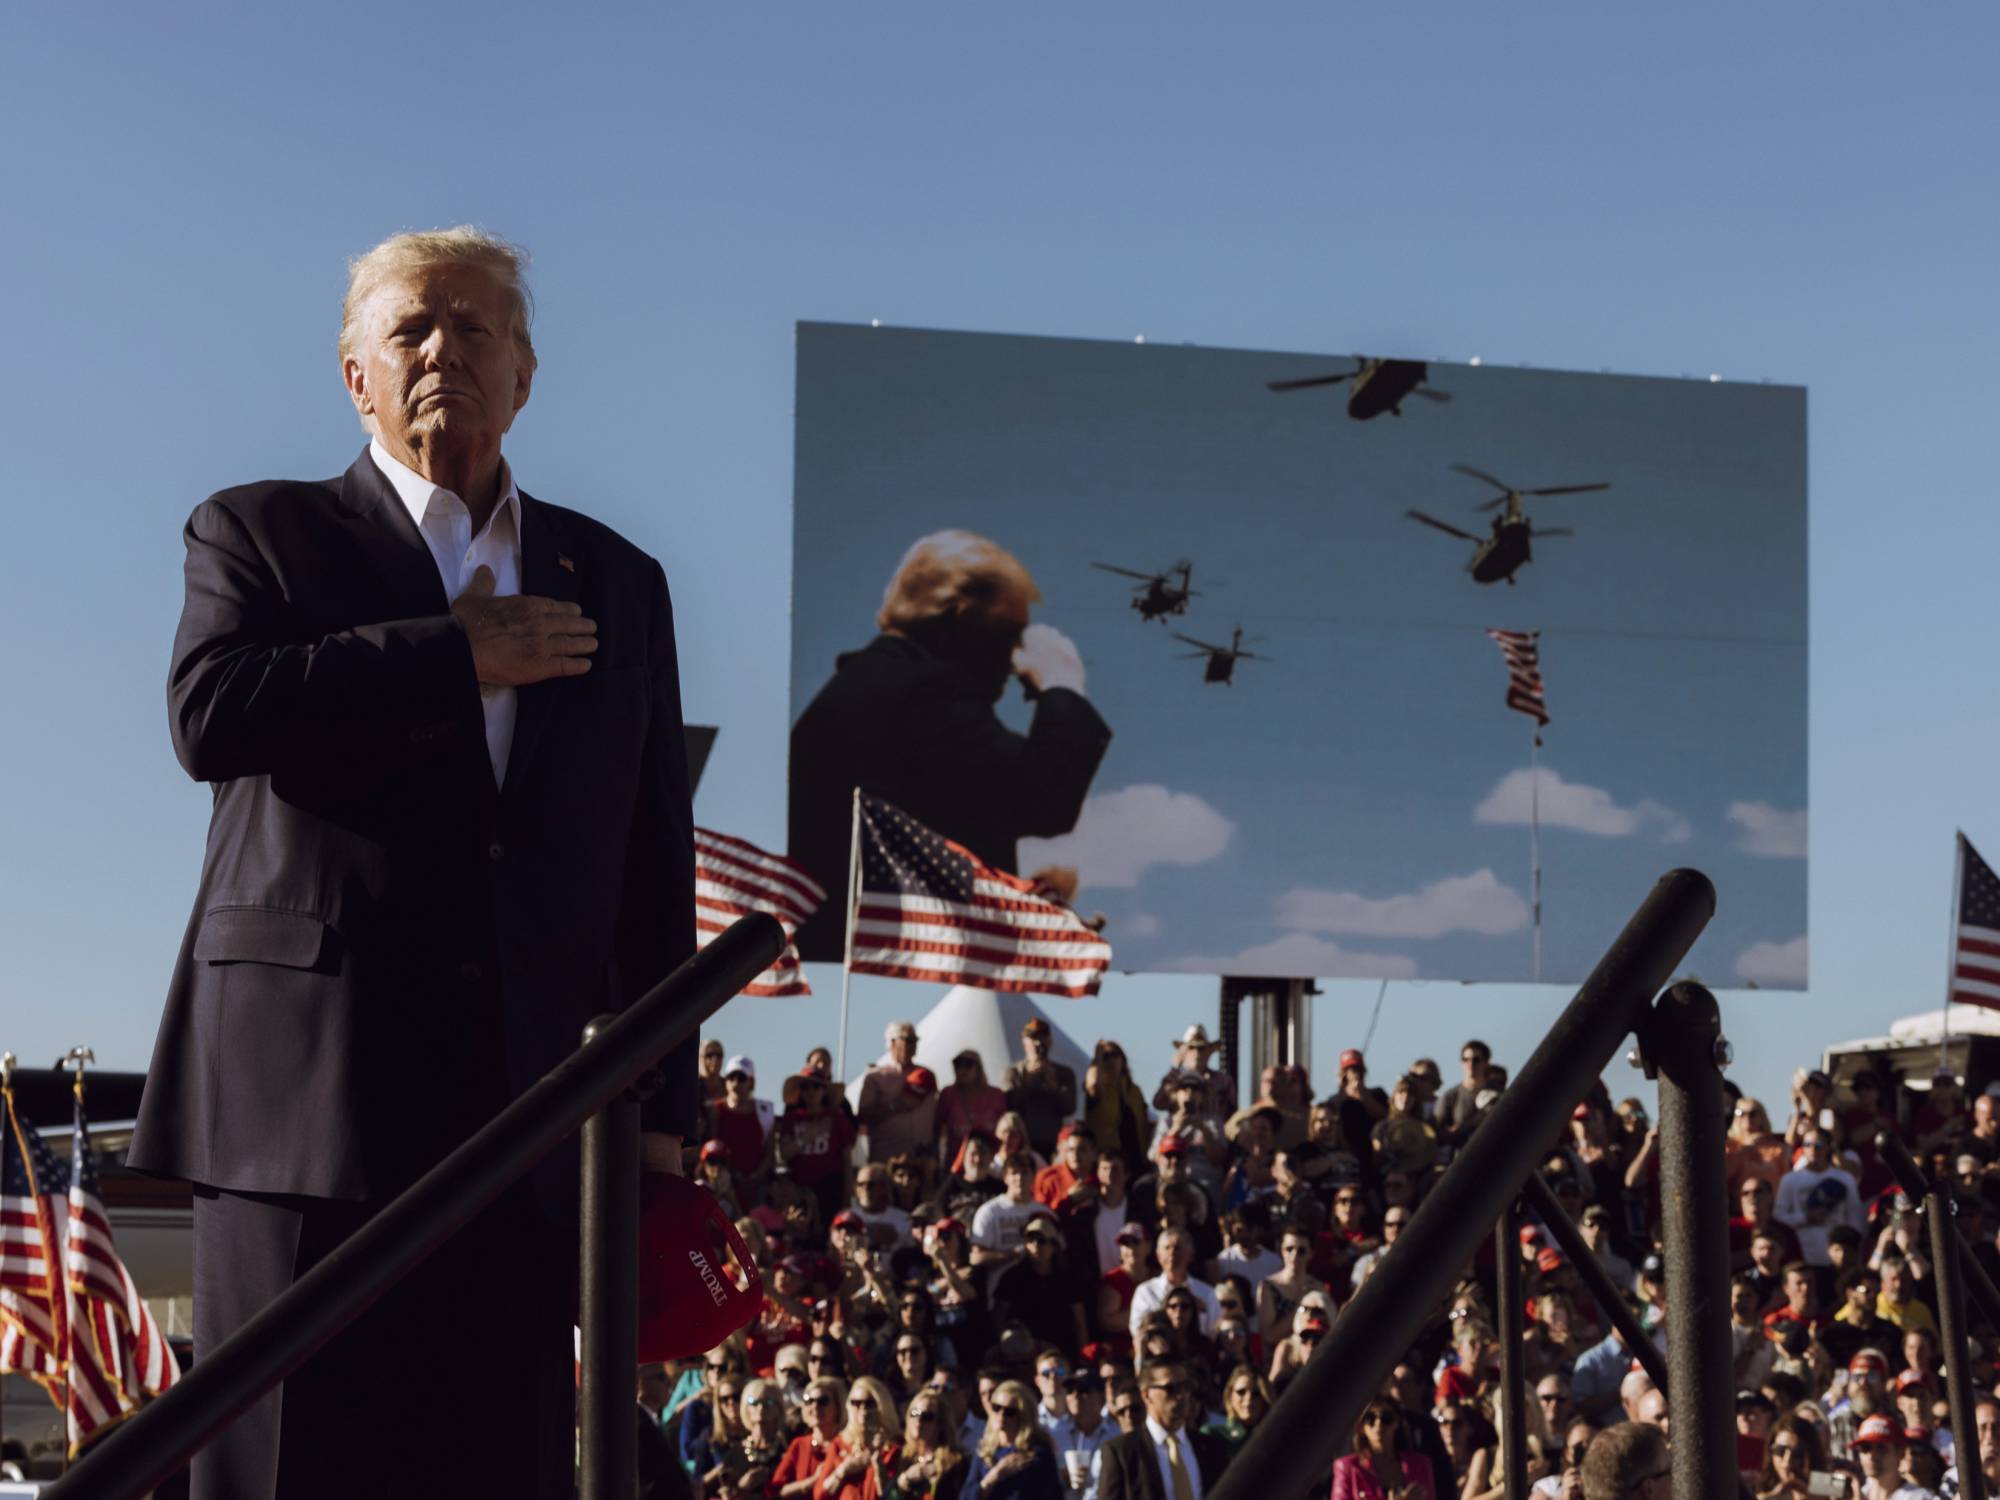 Former U.S. President Donald Trump stands during a campaign rally at Waco Regional Airport, in Waco, Texas, on Saturday. | CHRISTOPHER LEE / THE NEW YORK TIMES